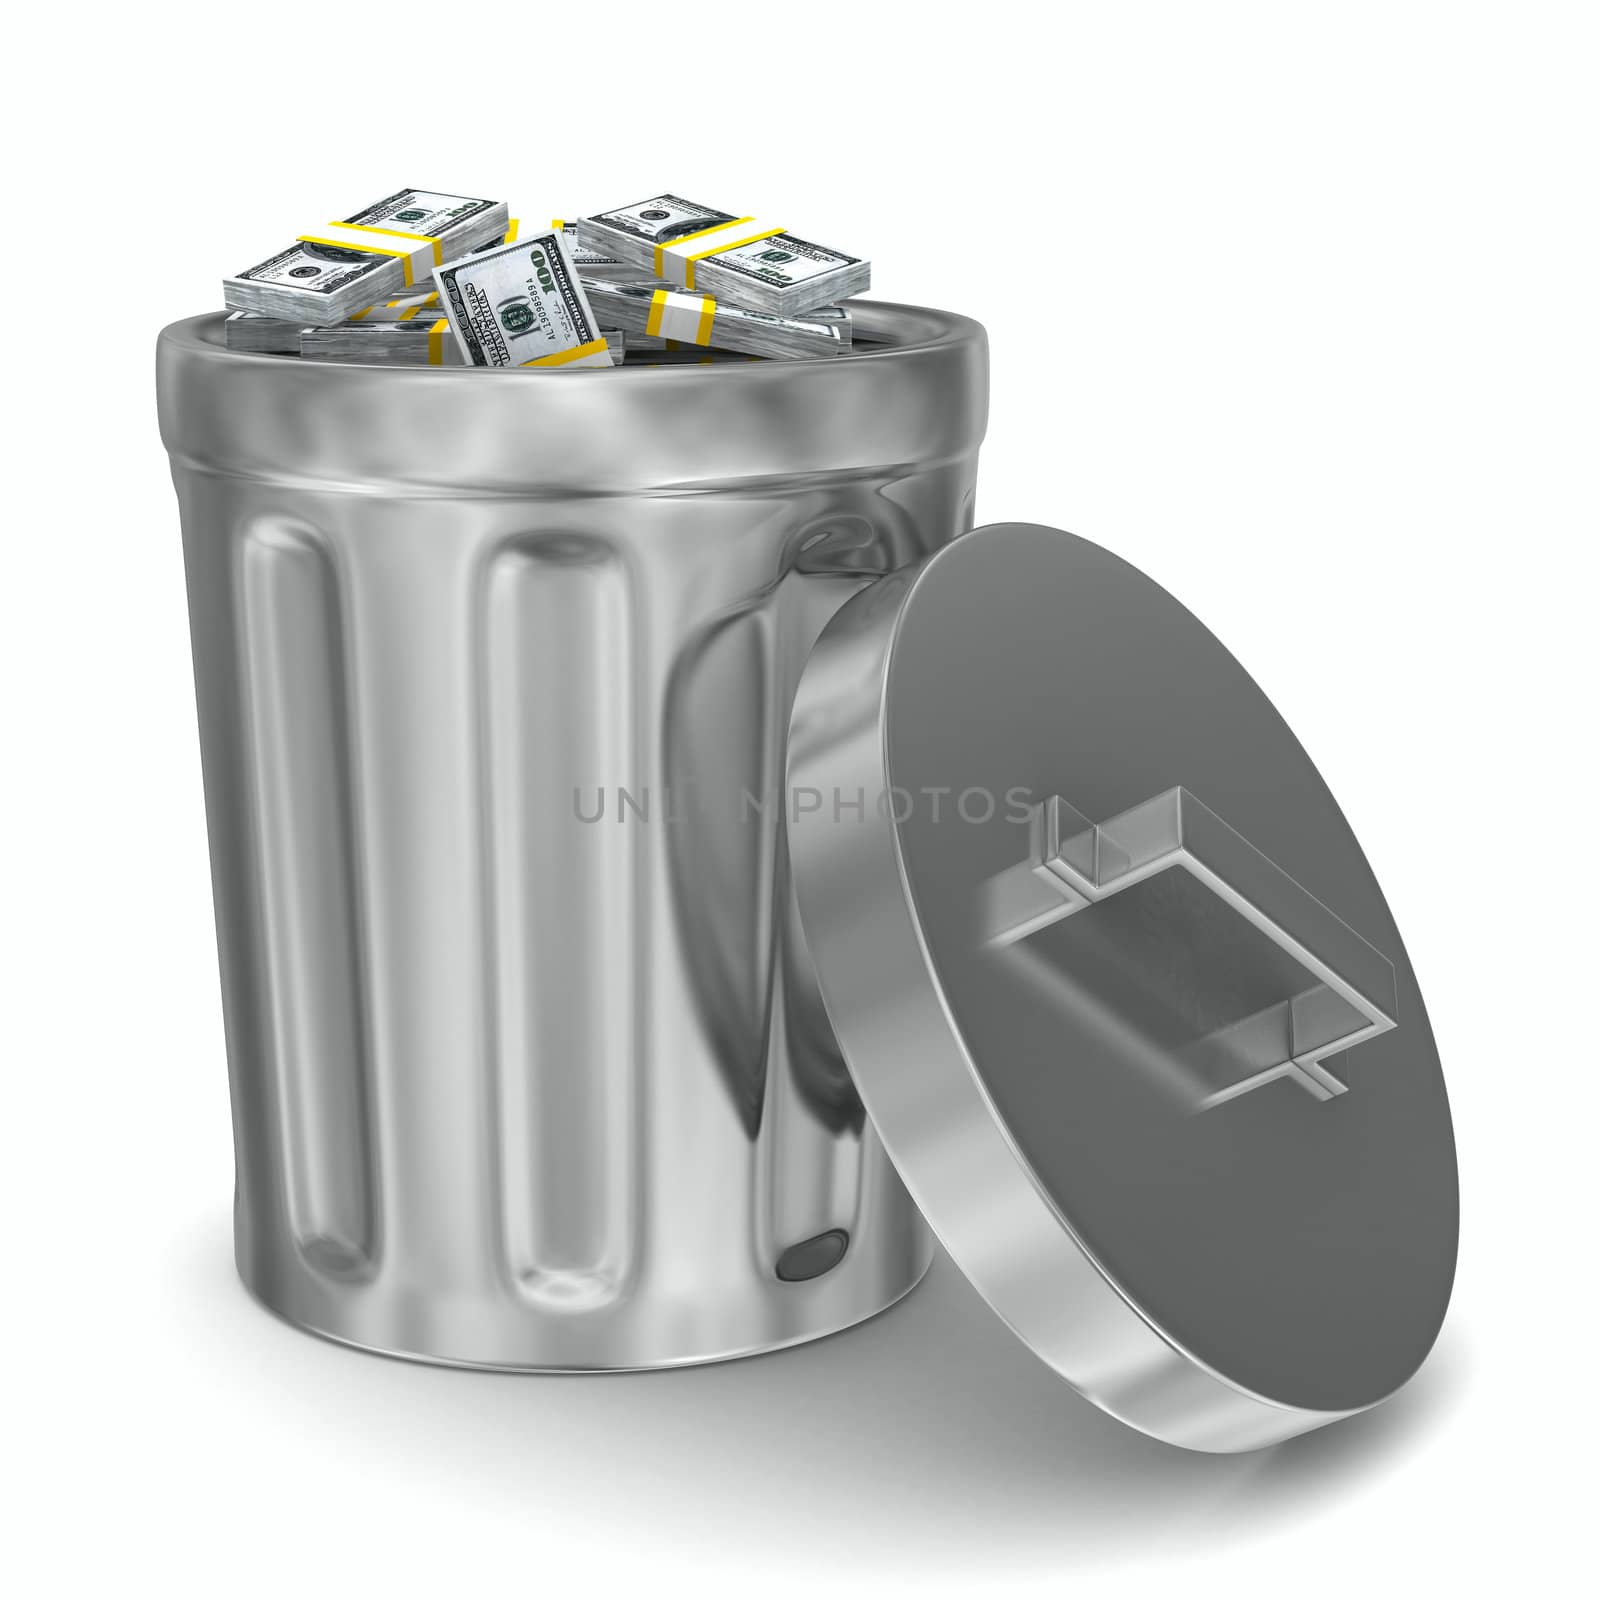 Garbage basket with dollars on white background. Isolated 3D image